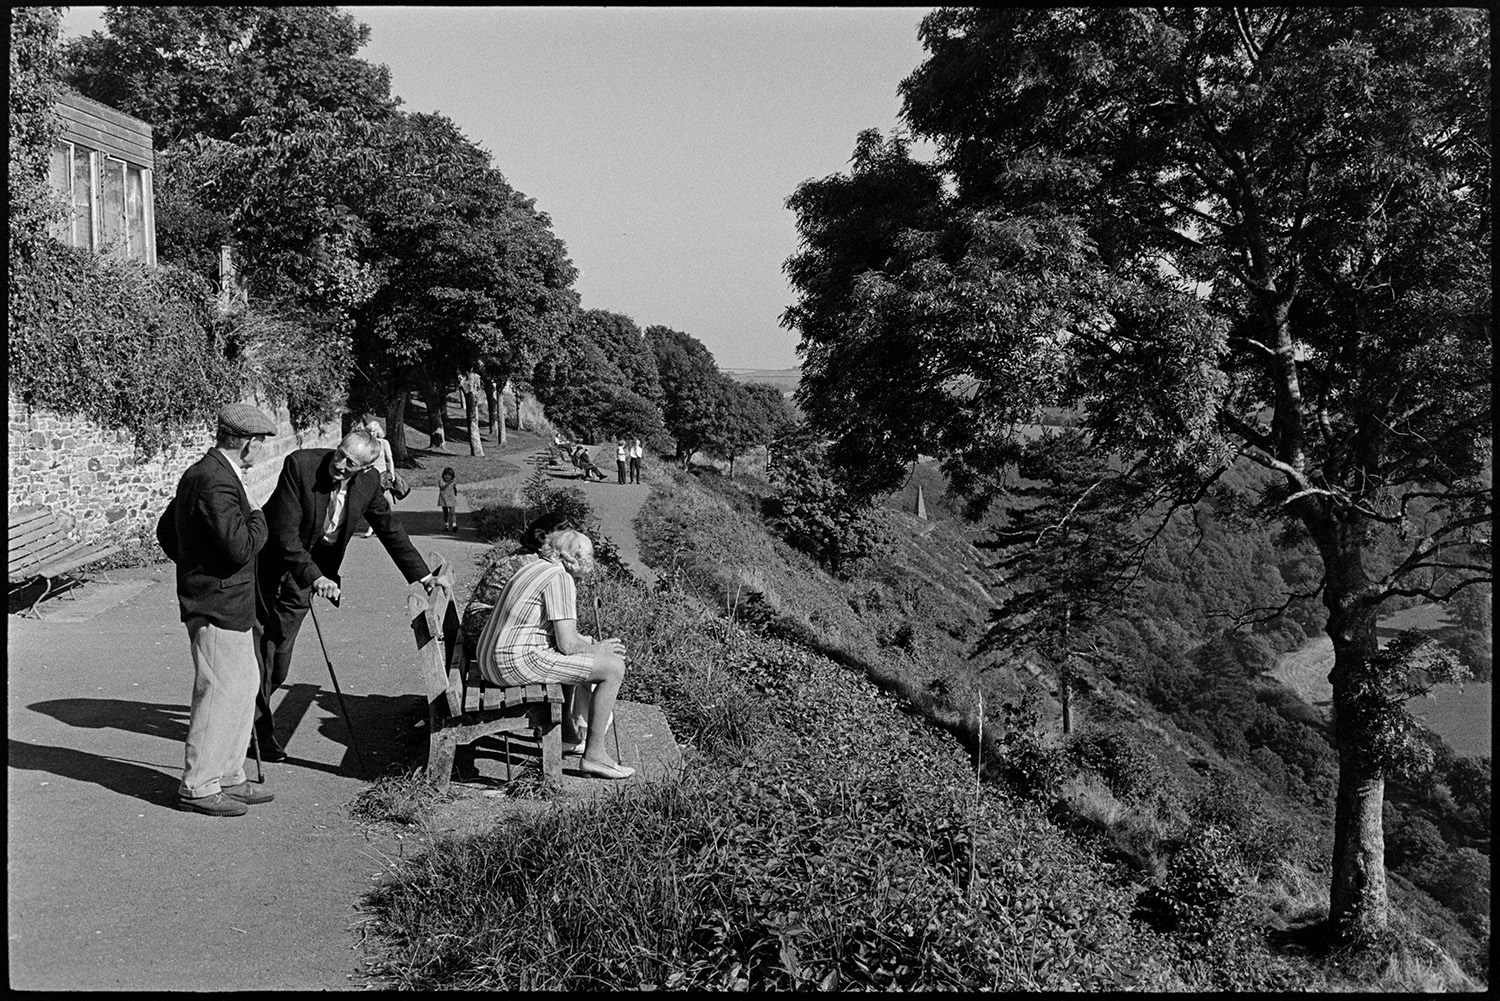 People and children enjoying park and fine view, bicycles. 
[Men, women and children sitting on benches and walking along  a path in park at Torrington. The valley below is covered with trees and foliage.]